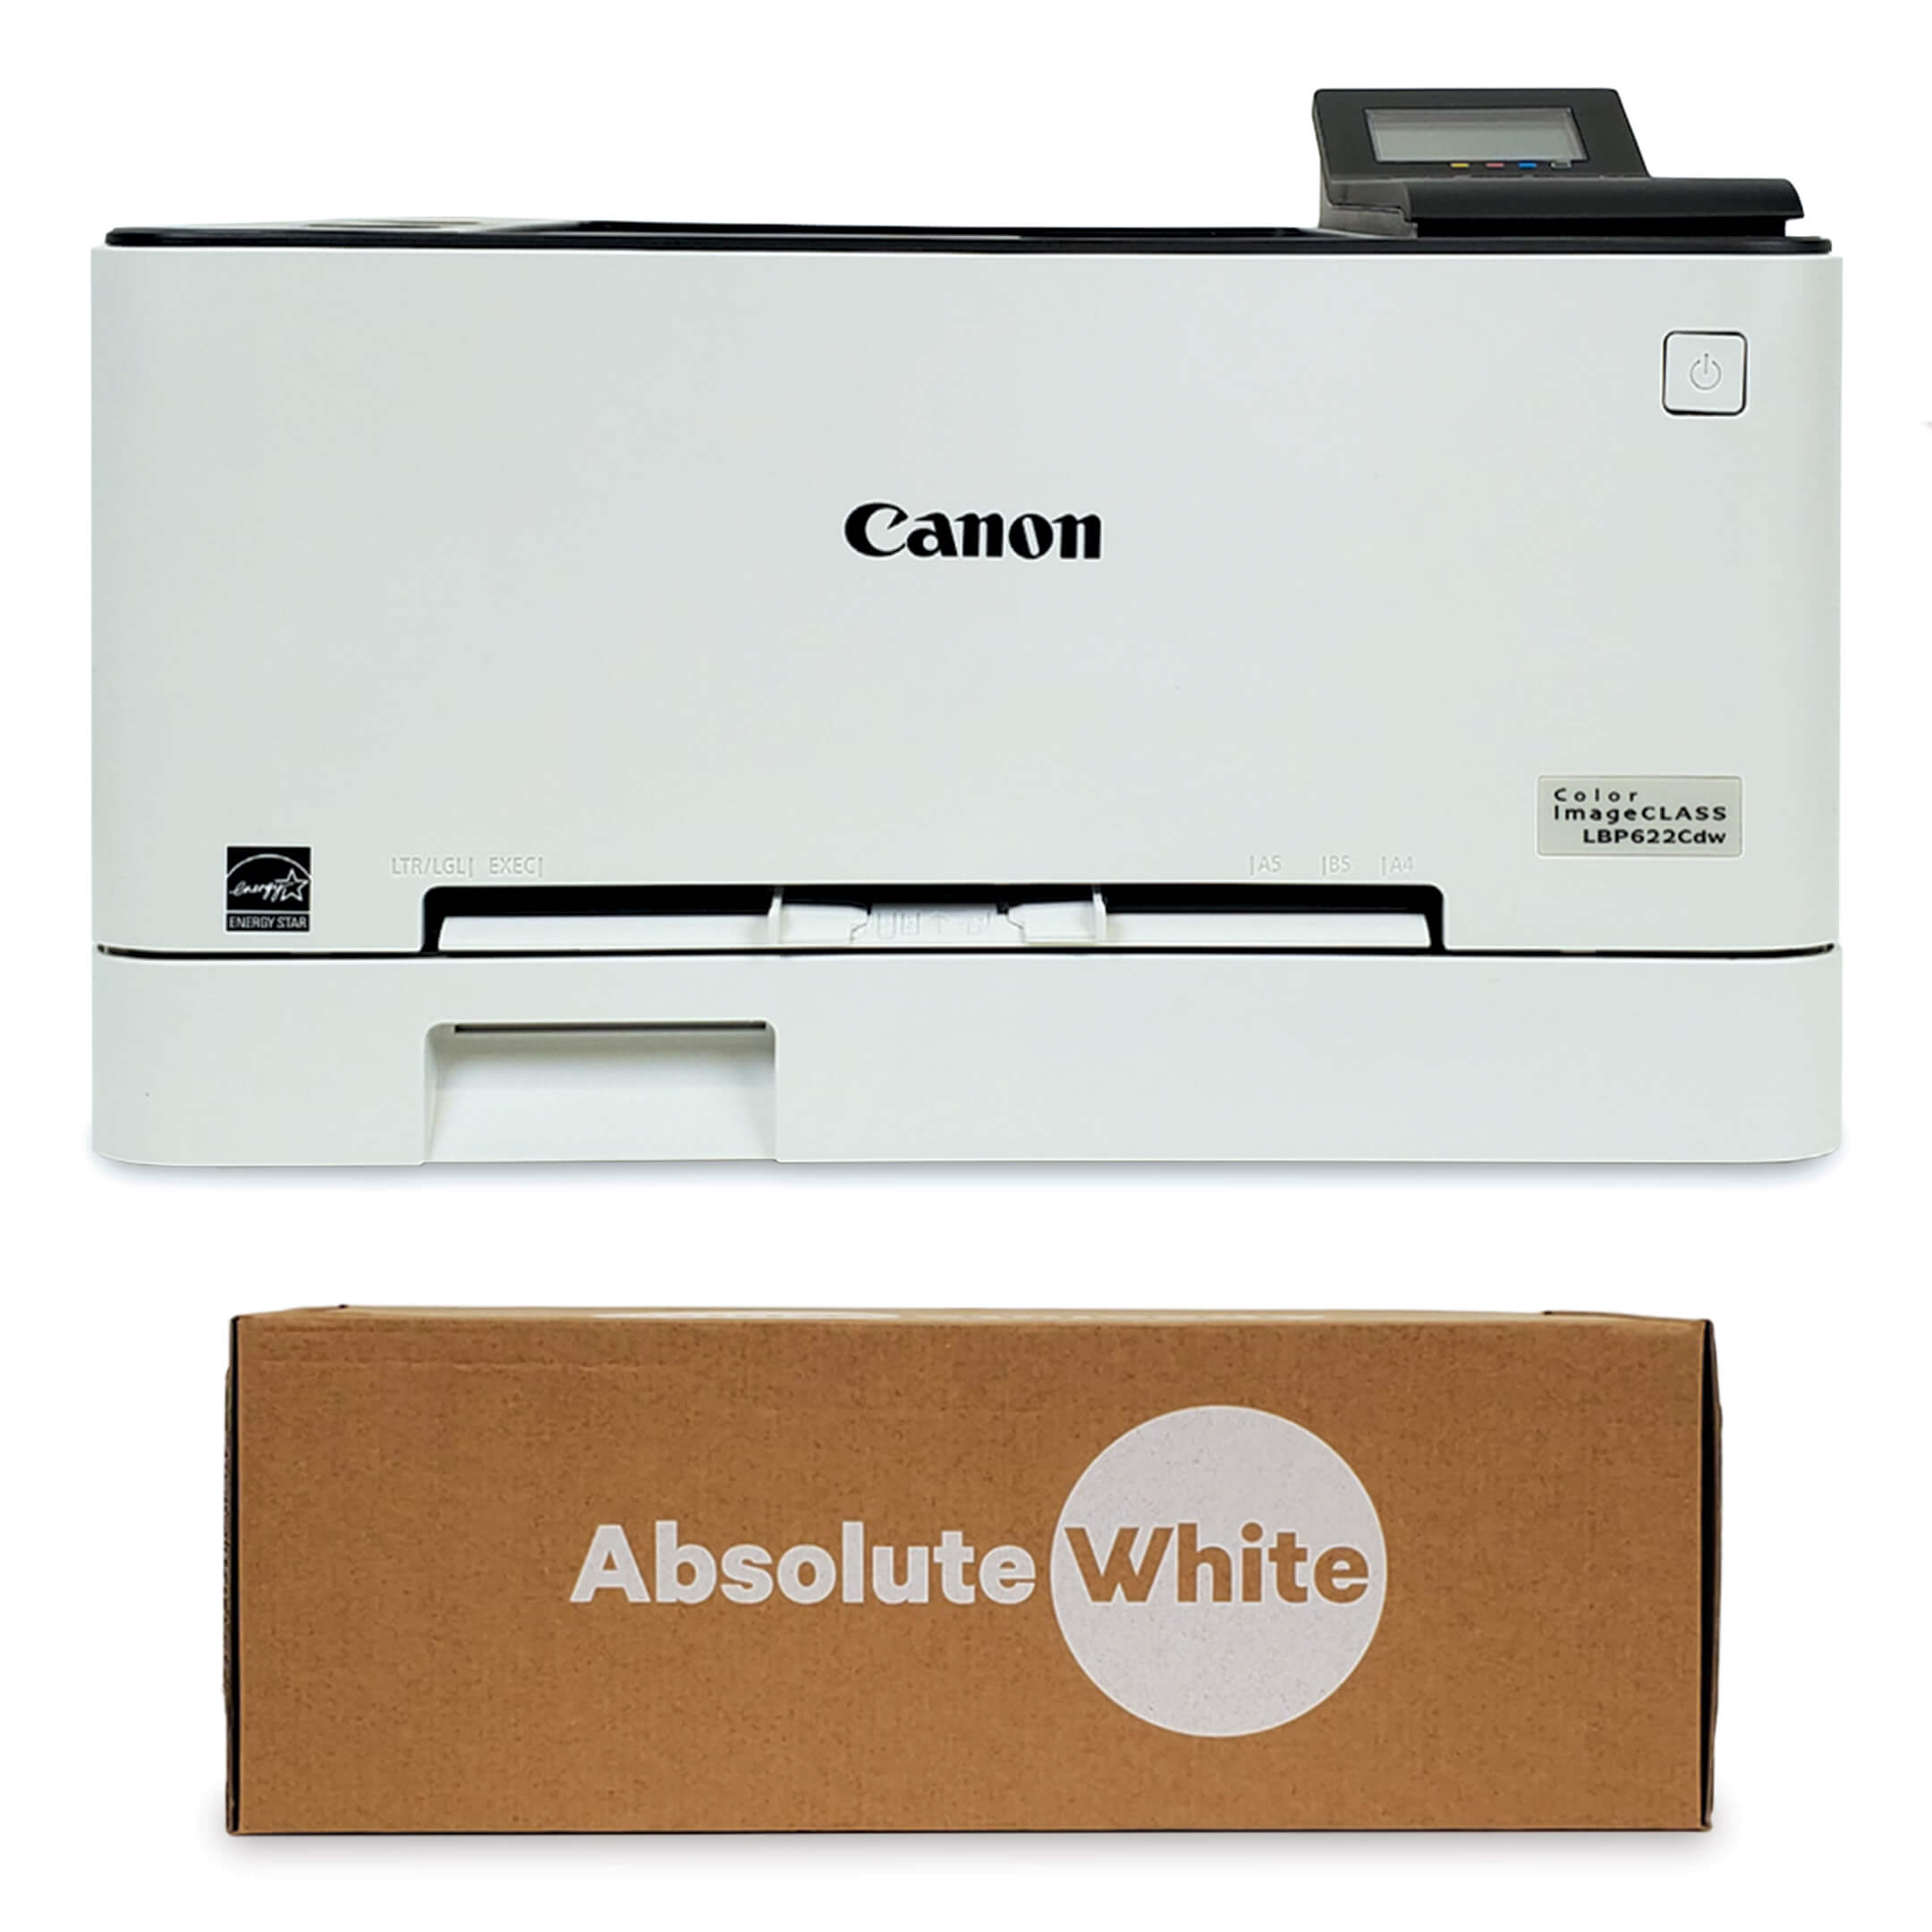 Canon LBP622CDW Color Printer with Absolute White Toner Bundle